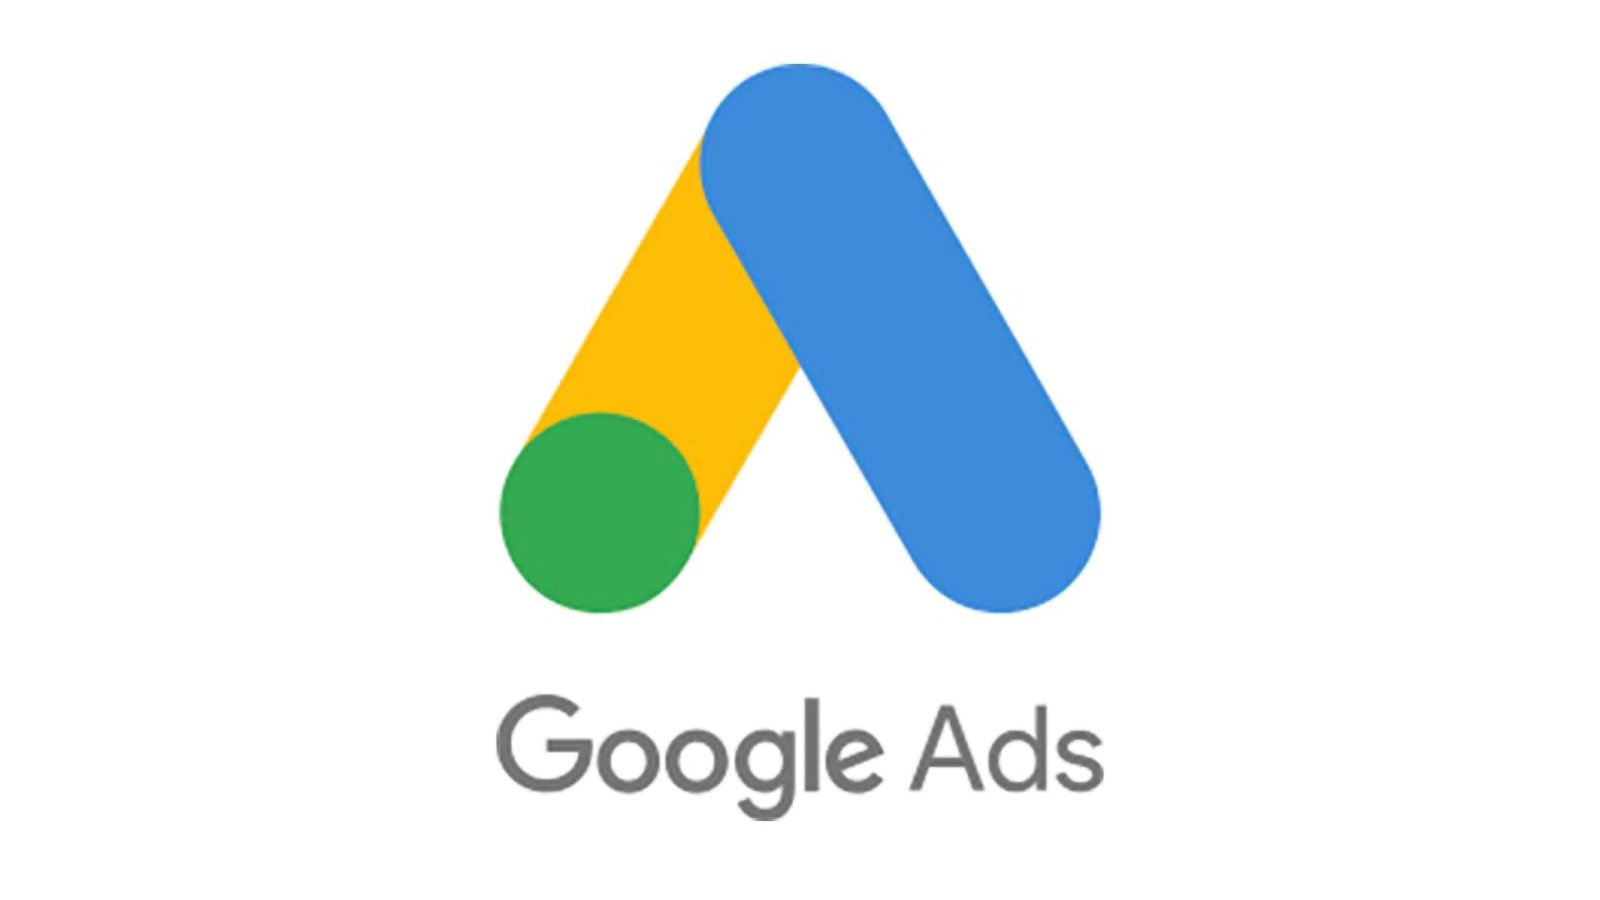 Enhanced AdWords Campaigns – Helpful or Not?